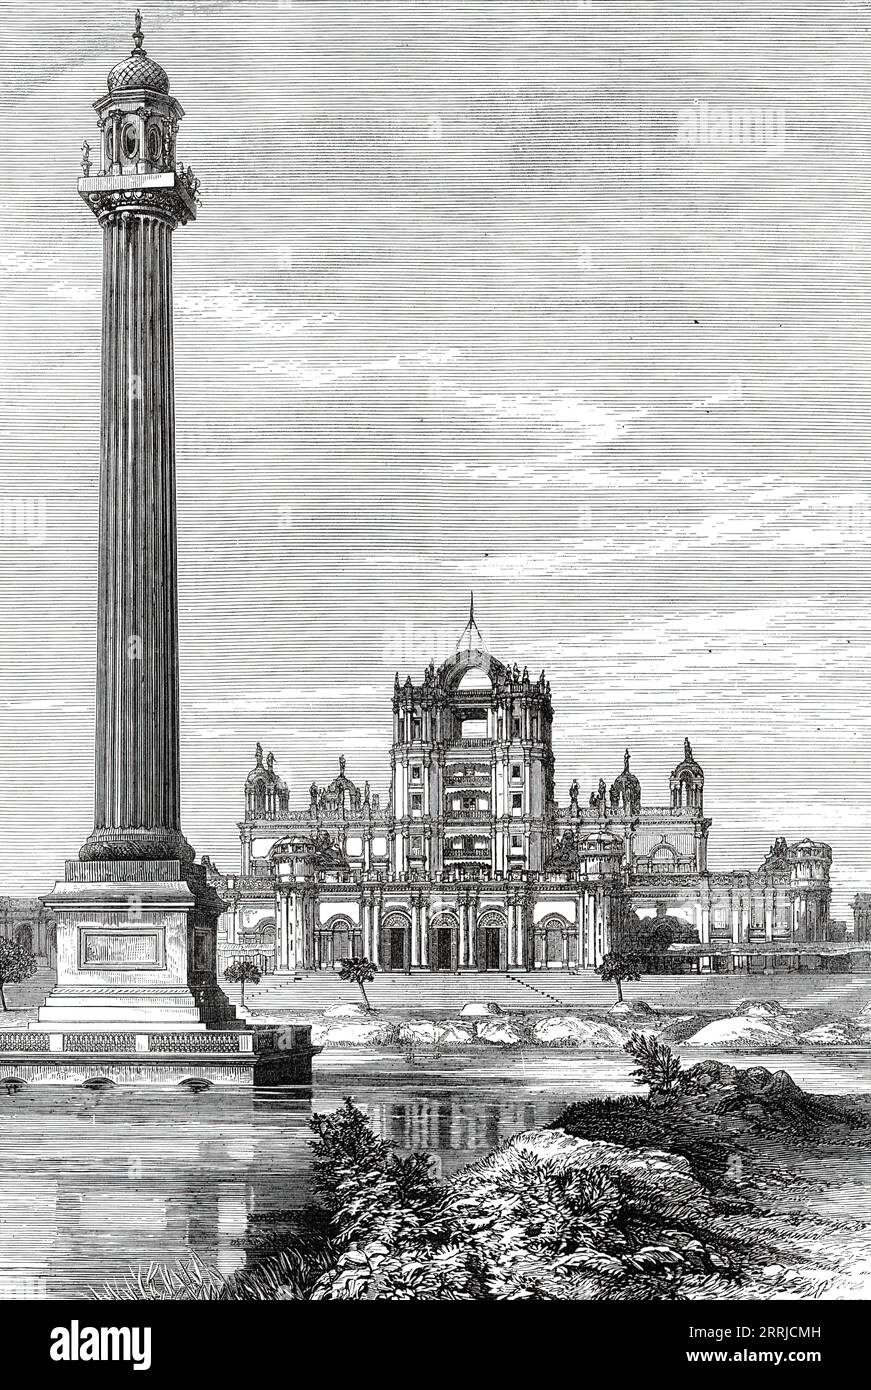 The Martiniere, Lucknow, 1876. 'At first glance one exclaims, &quot;How beautiful! what a splendid building!&quot; at the second, &quot;Why, it must have been built by a madman!&quot; At the distance of more than half a mile we can make out the eccentric array of statues, the huge lions' heads, the incongruous columns, arches, pillars, windows, and flights of stairs leading to nothing, which are the distinguishing features of the Martiniere'. La Martini&#xe8;re Boys' College was founded by an endowment from the wealthy Frenchman, Major-General Claude Martin. Constantia, the palatial building w Stock Photo